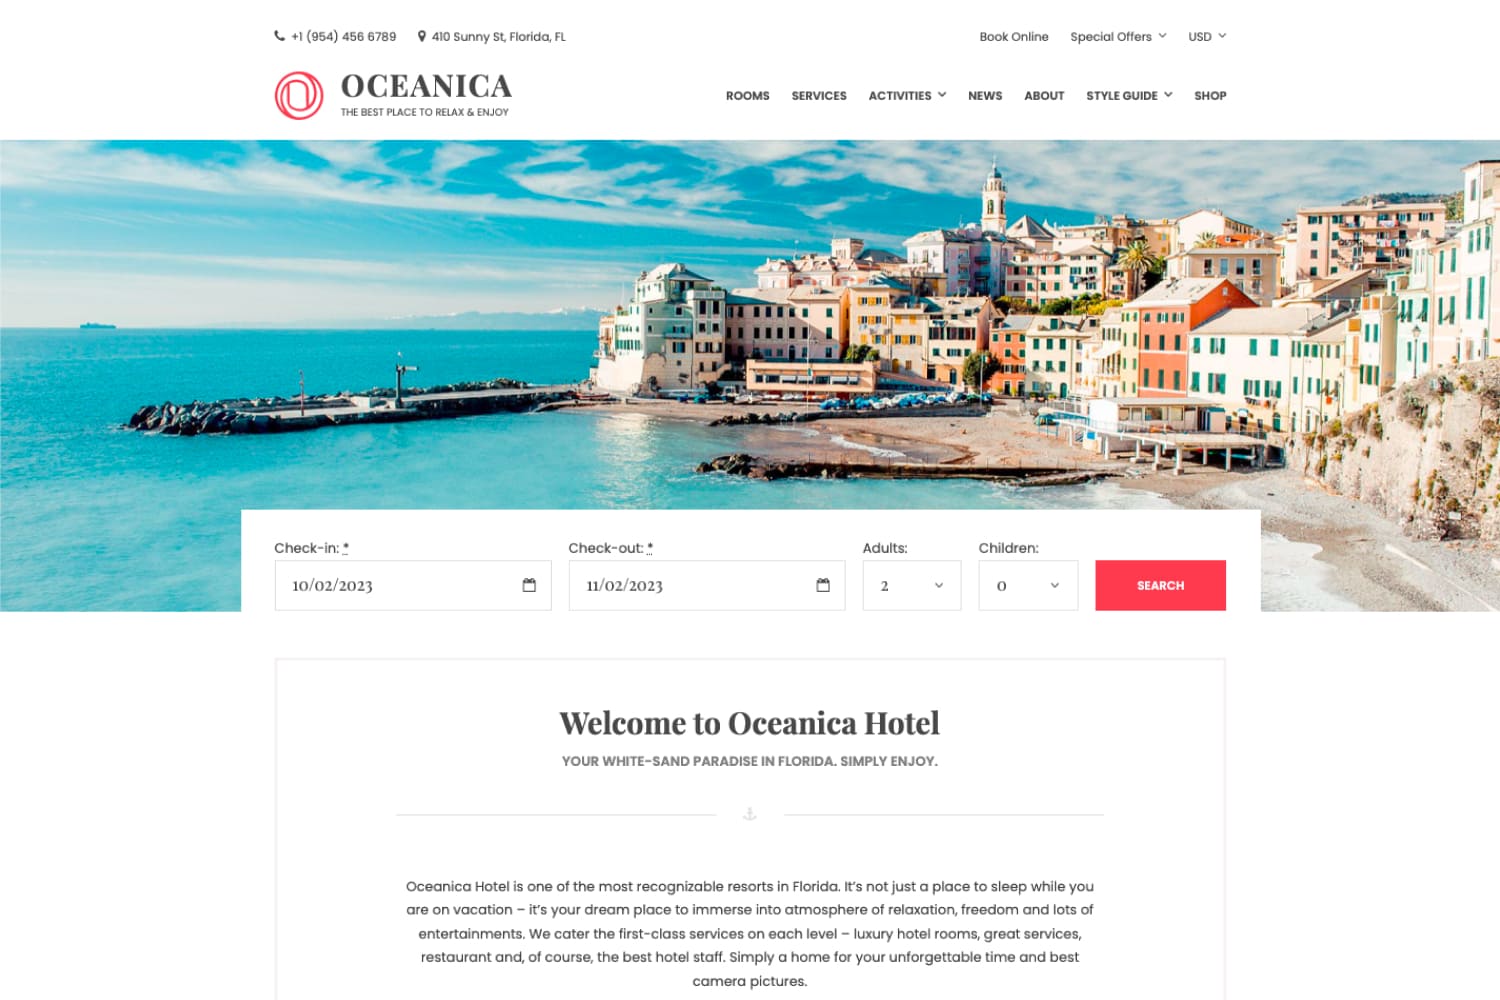 The main page of the hotel website with a photo of the city on the seashore and a description of the hotel.